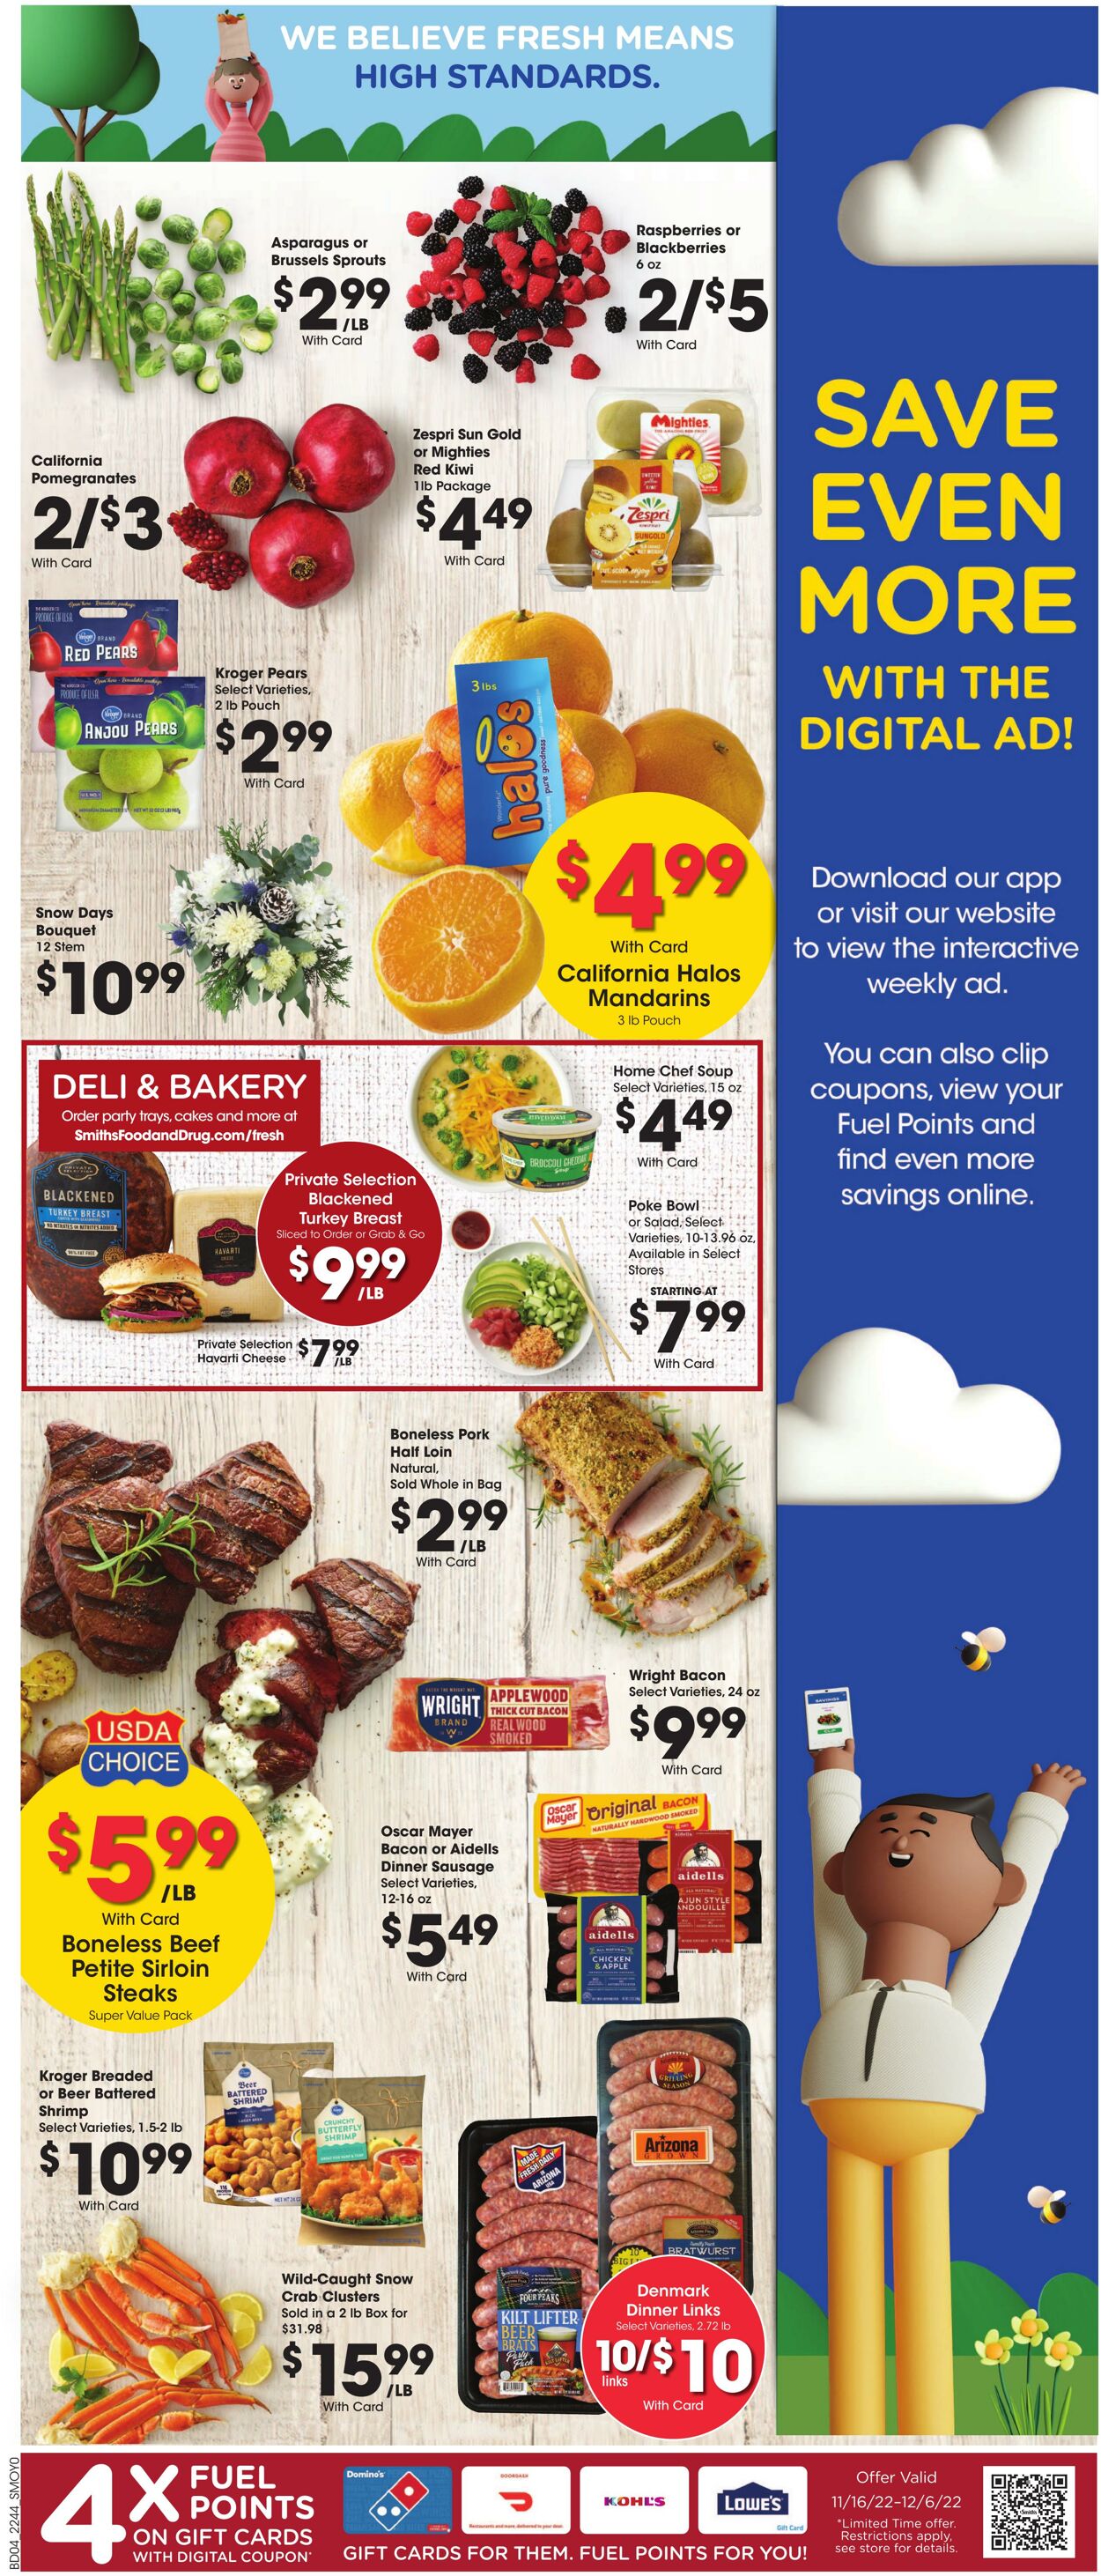 Weekly ad Smith’s Food and Drug 11/30/2022 - 12/06/2022